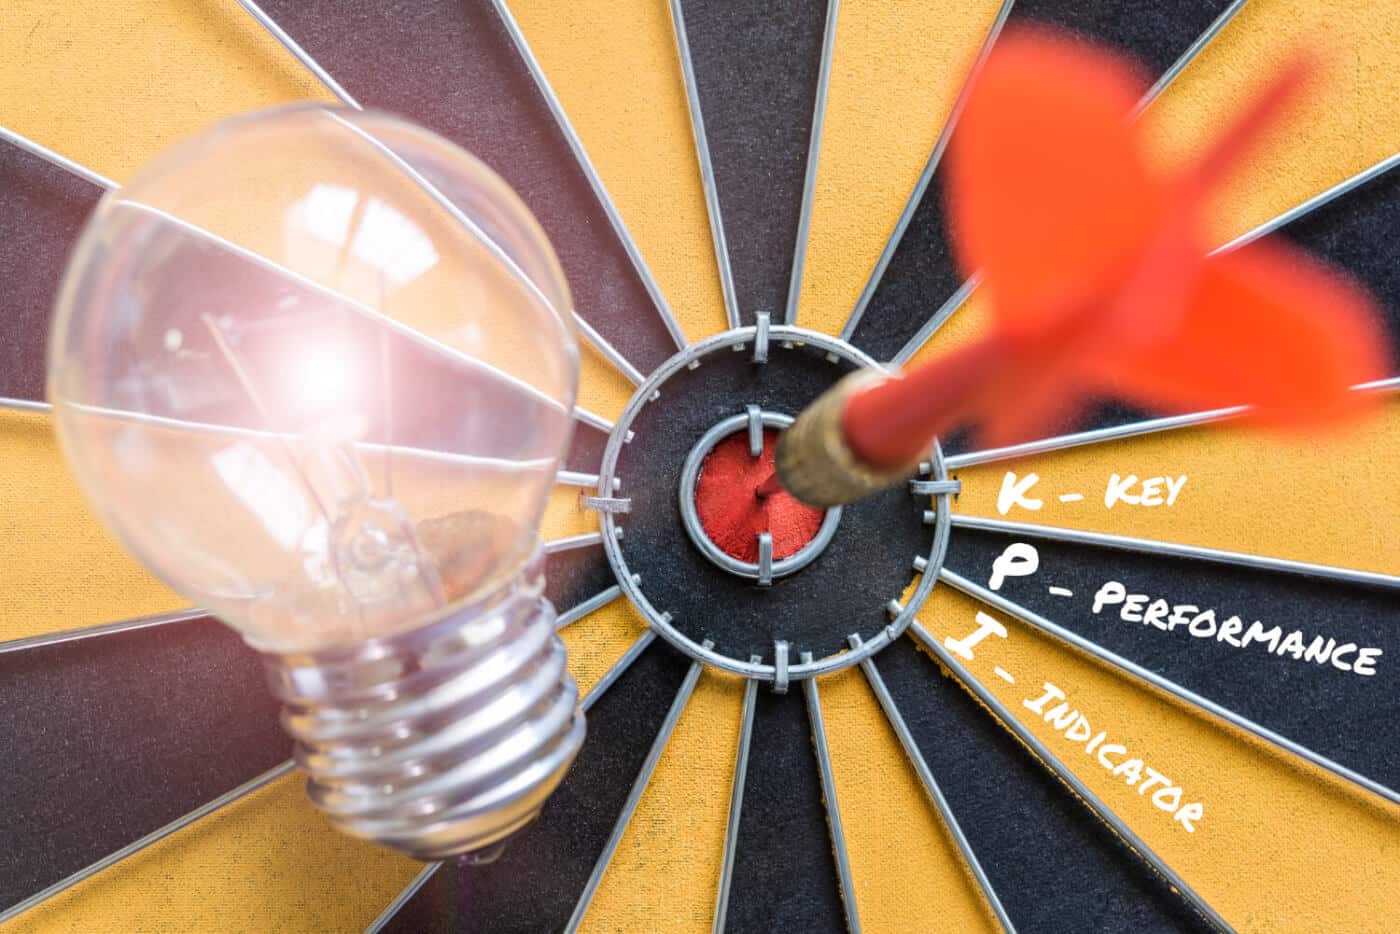 A dartboard with a light bulb and a "KPI, Key, Performance, Indicator" text in the center.